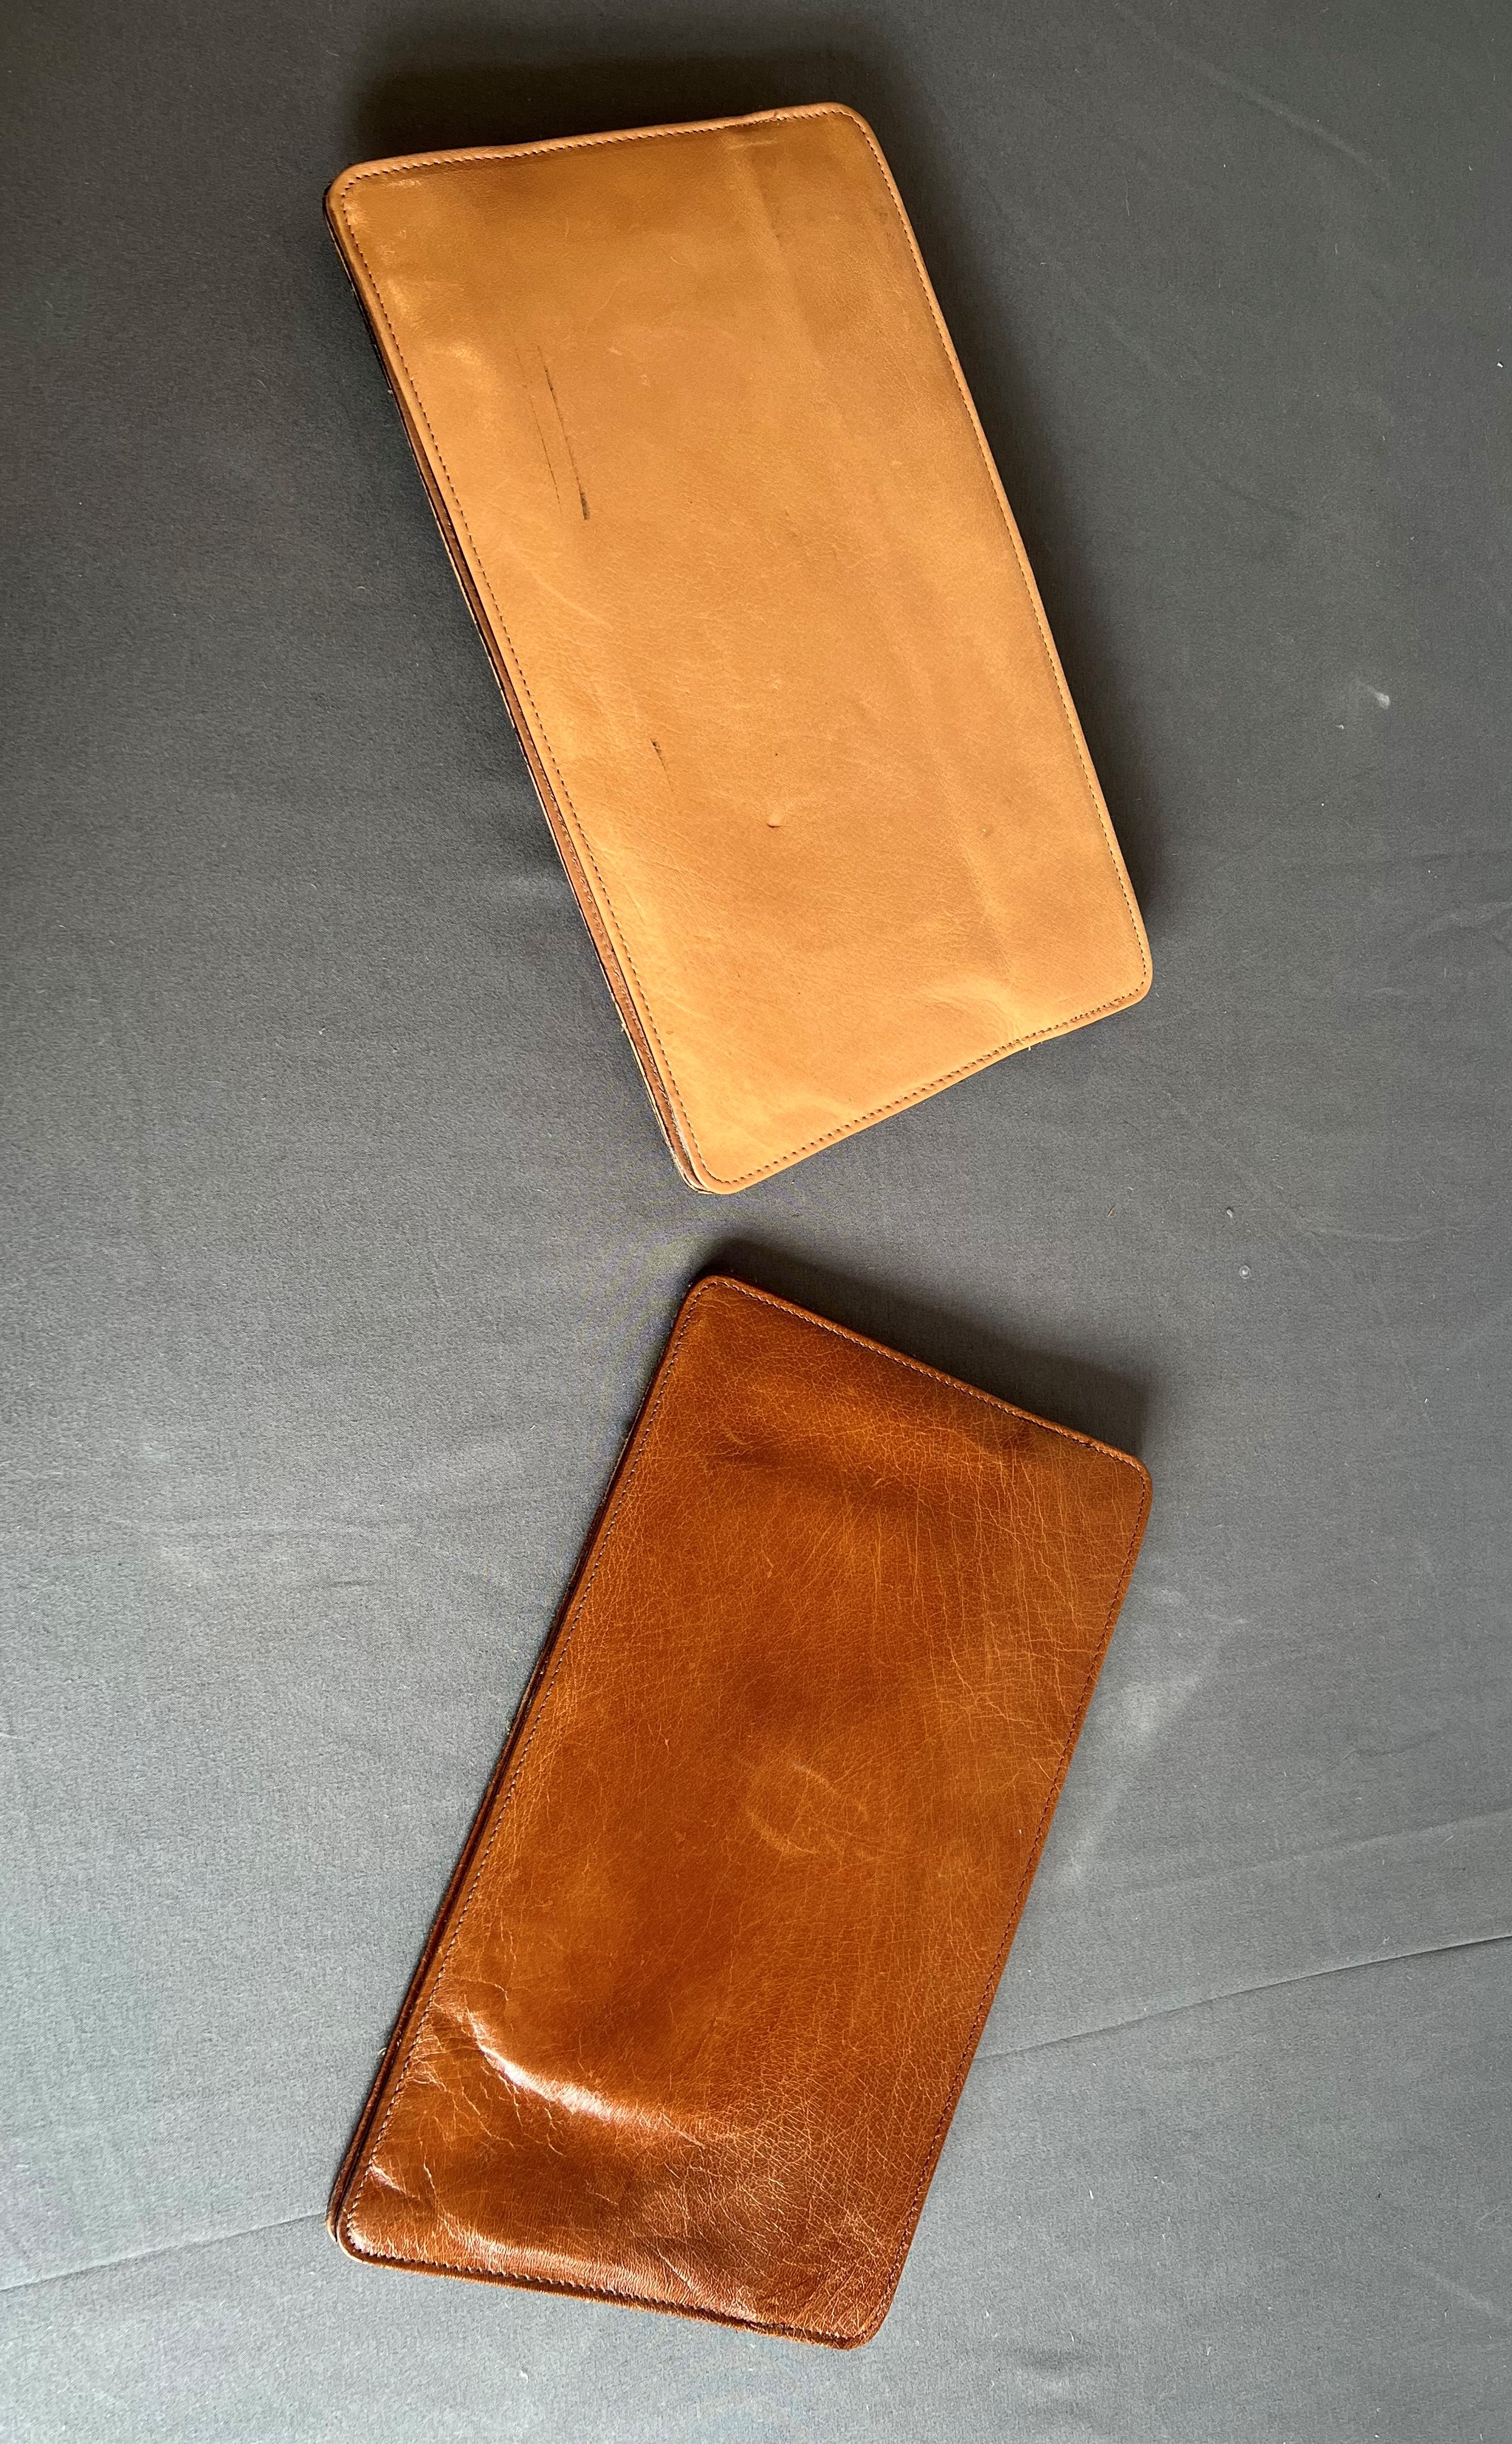 Two vintage Elgee clutch bags, 1960s-70s - one in tan leather, the other in pale tan leather, with - Image 2 of 6